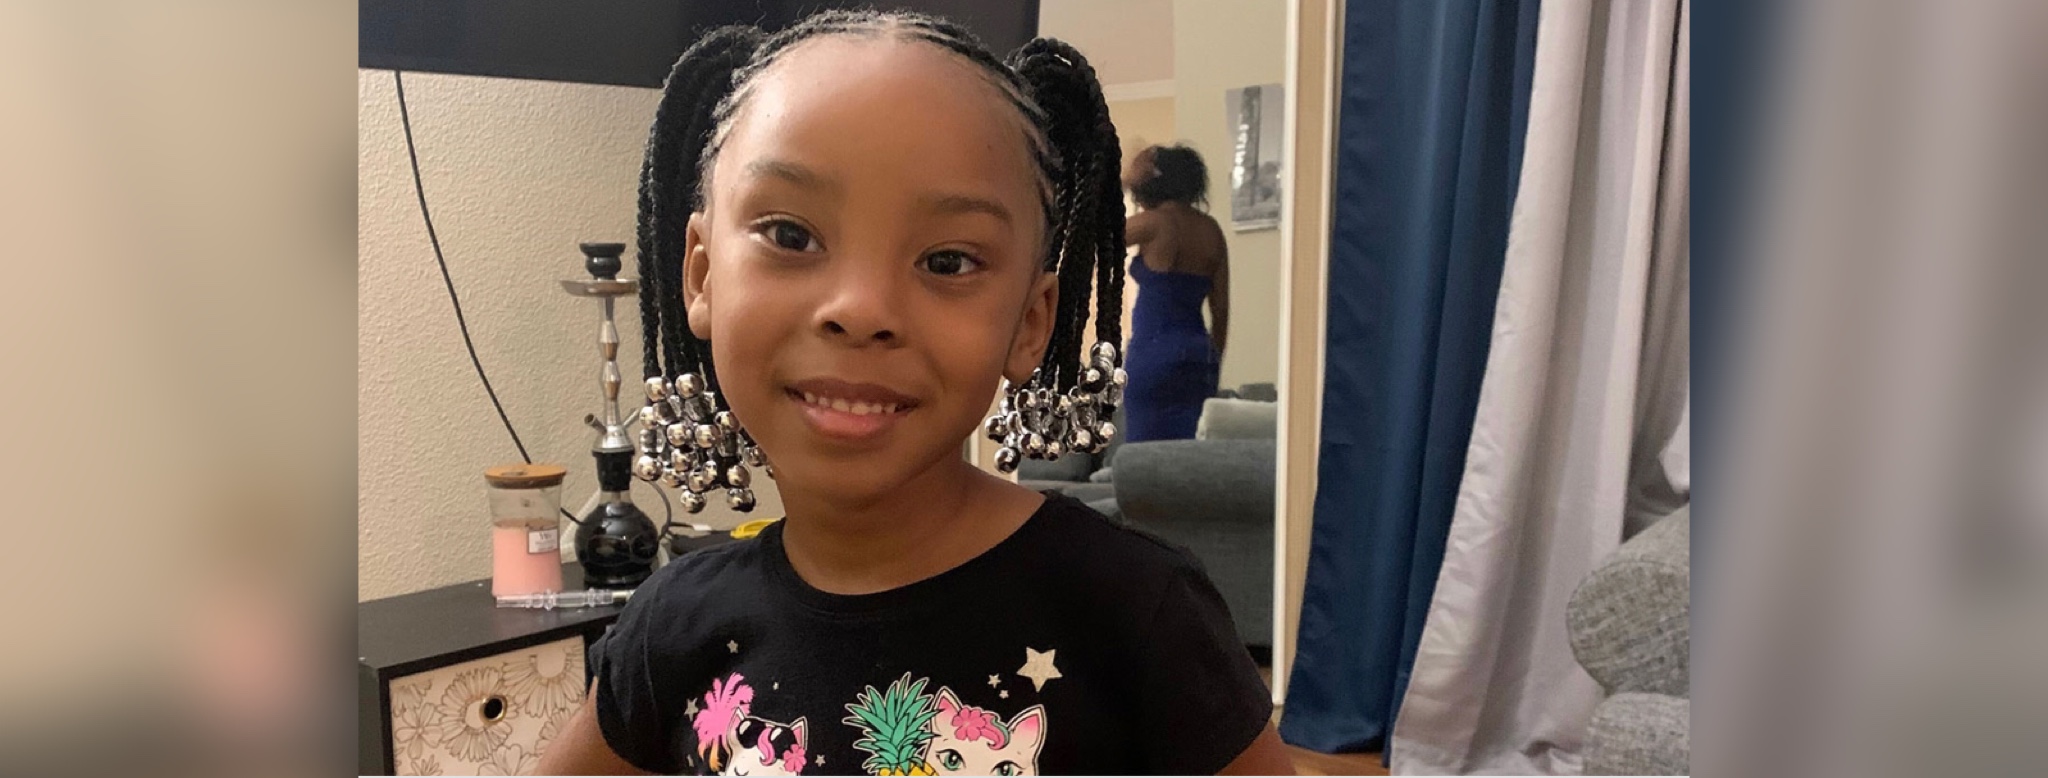 5 Year Old Missing Texas Girl Found Safe - SmashDaTopic